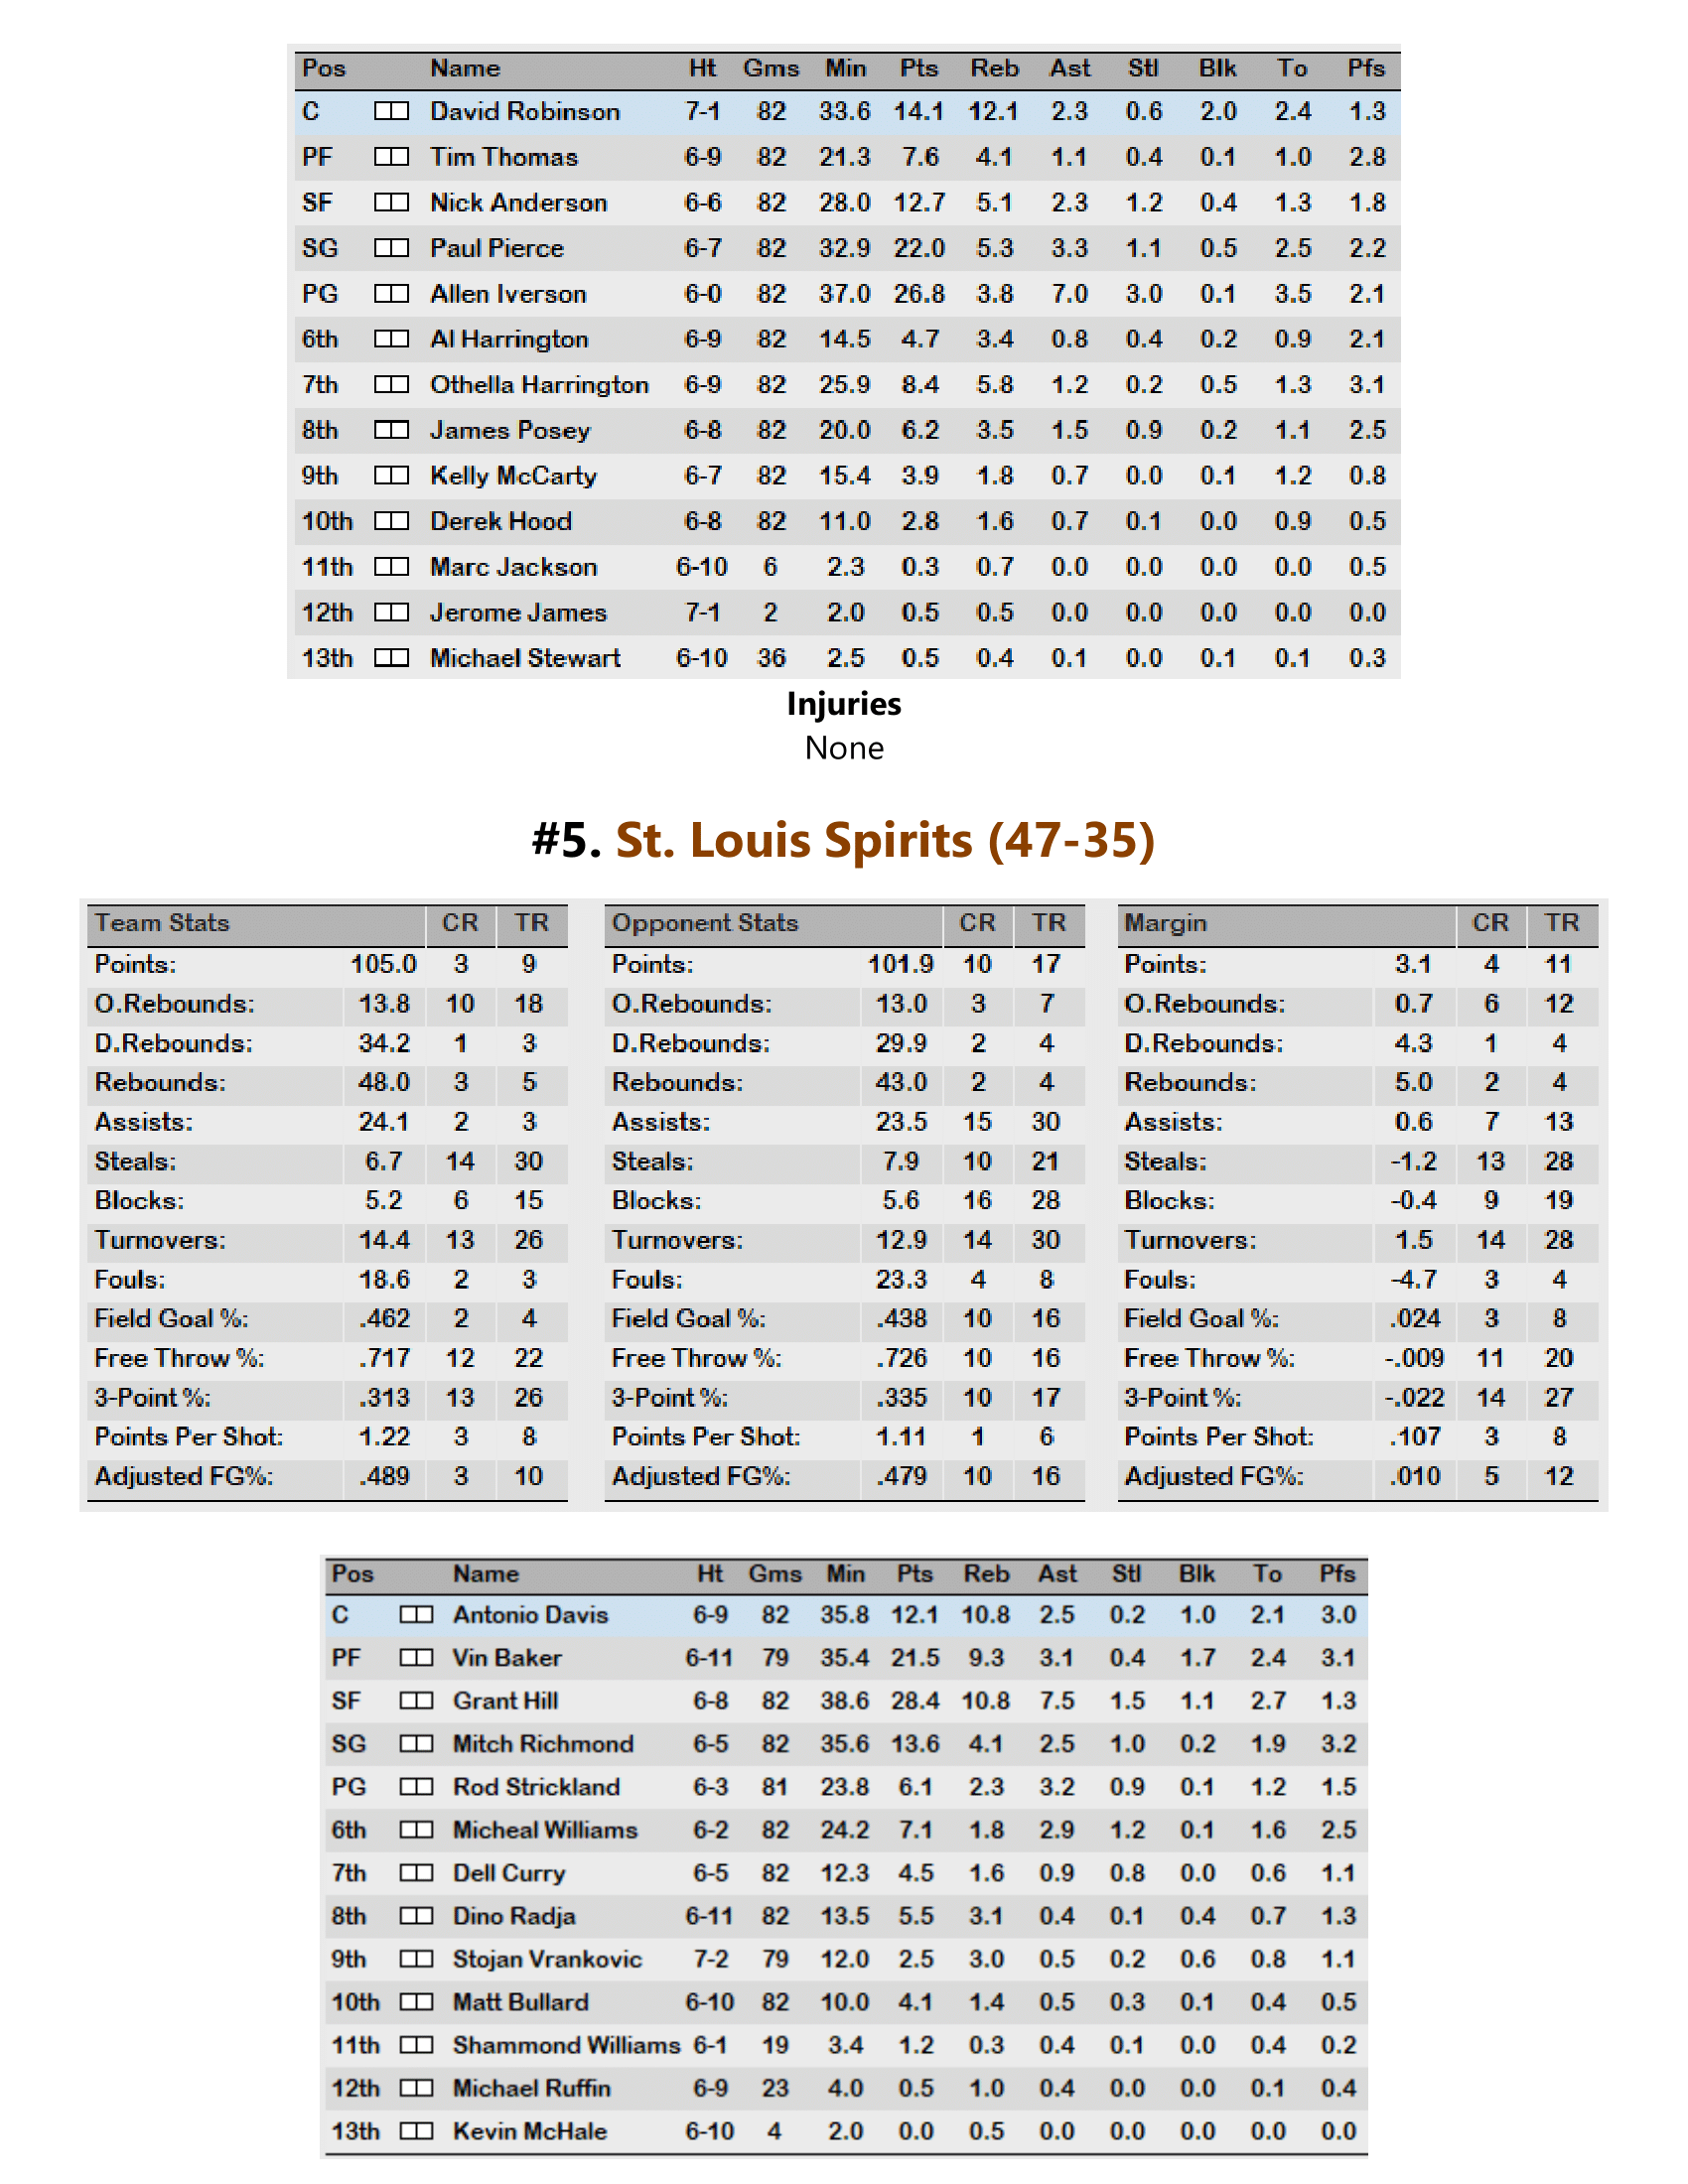 99-00-Part-3-Playoff-Preview-05.png